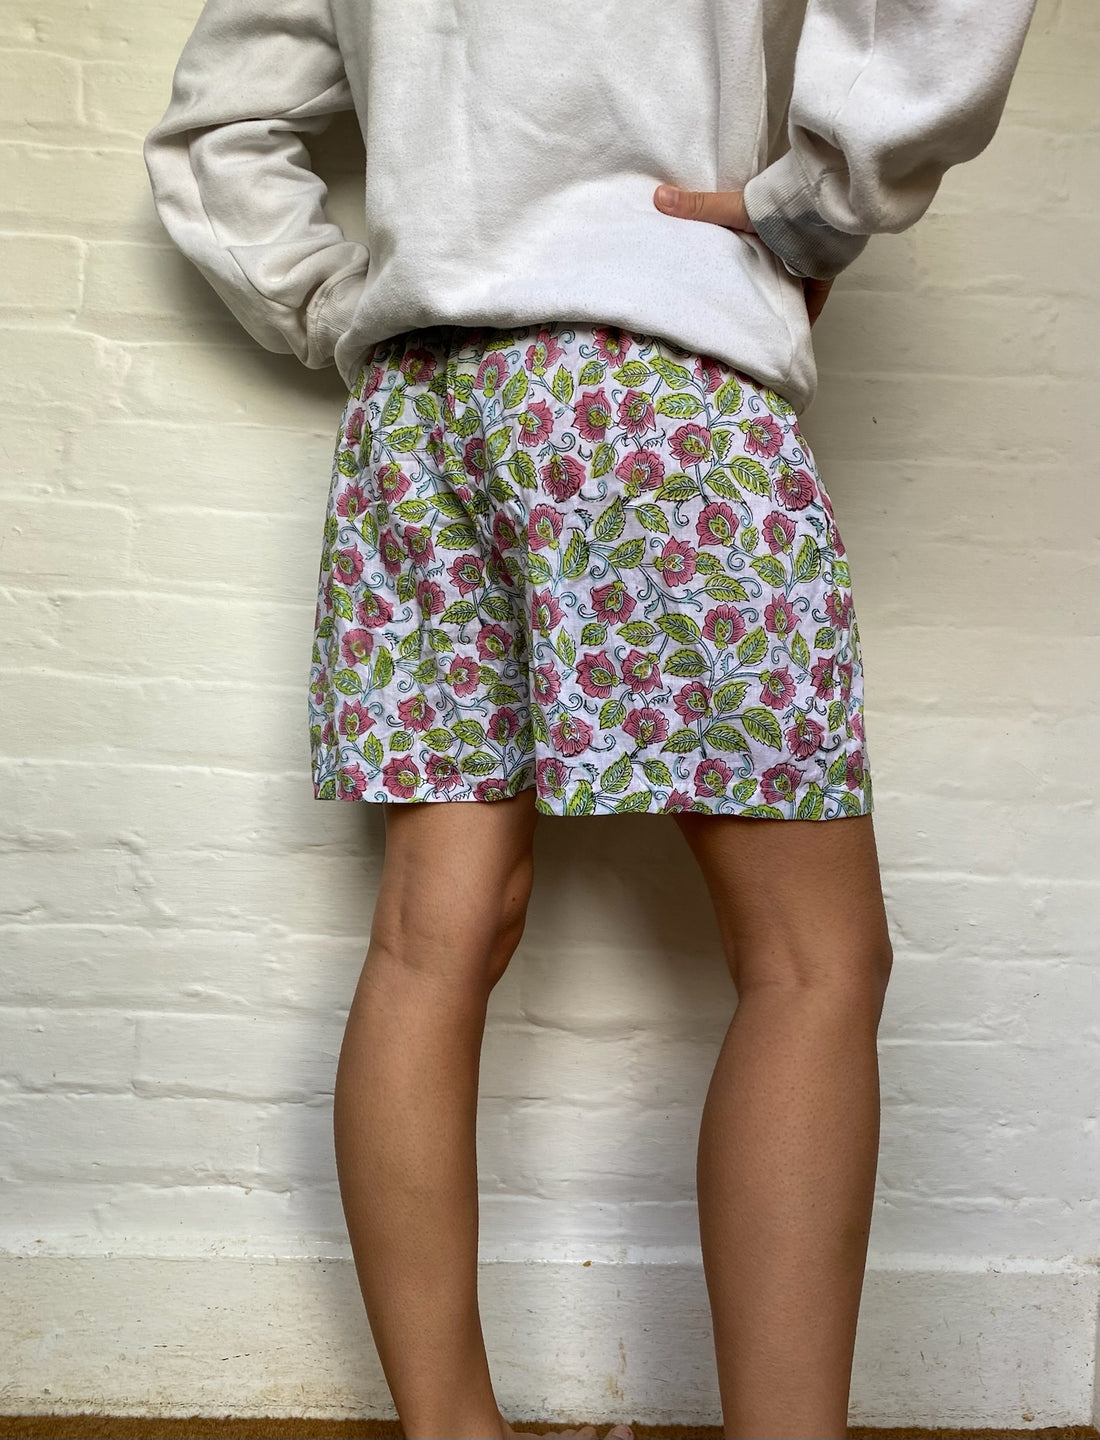 Unisex Indian Block Print Boxer shorts - Lime and Pink